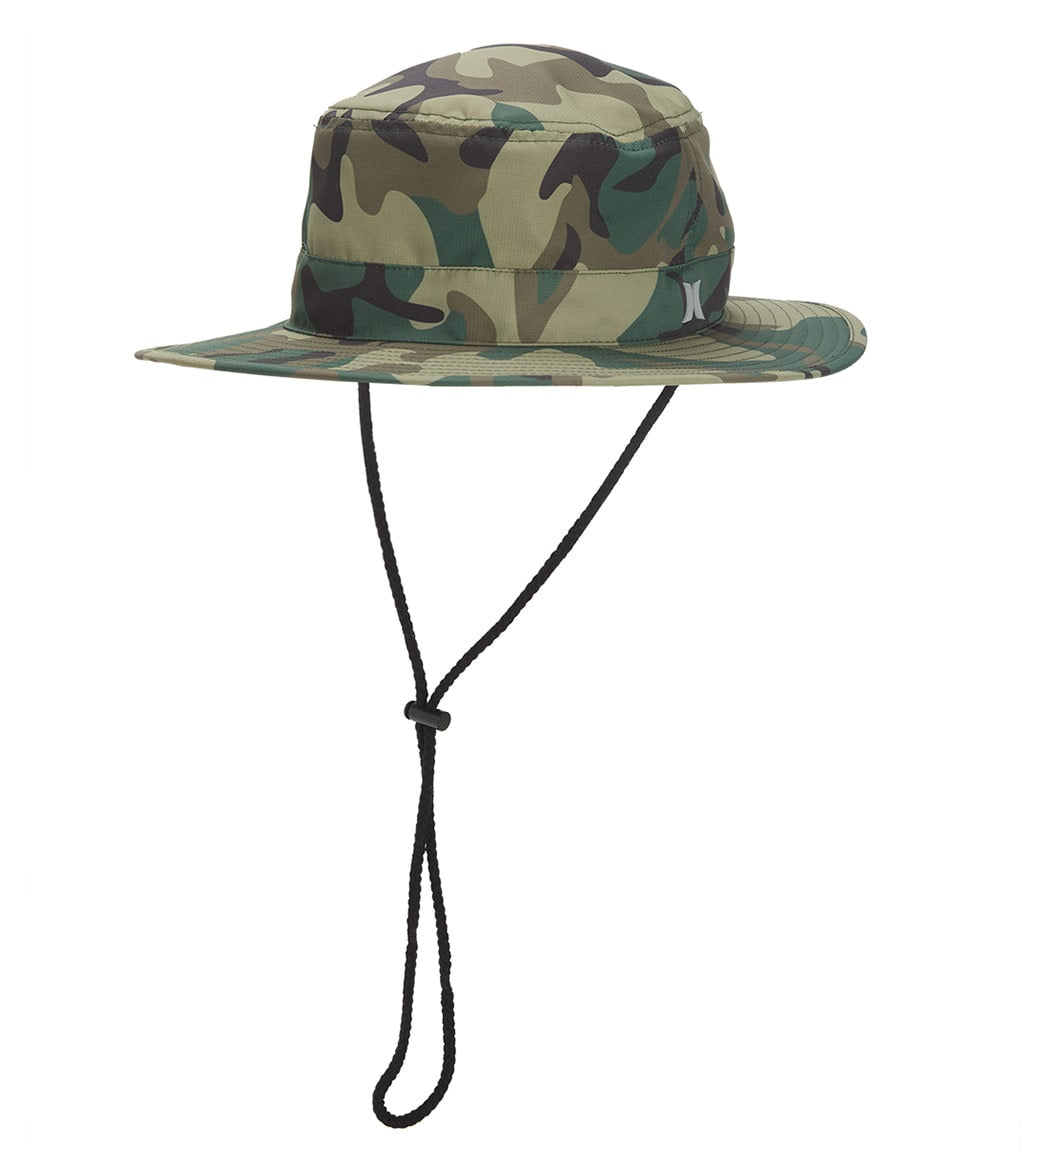 Hurley Men's Back Country Boonie Hat at SwimOutlet.com